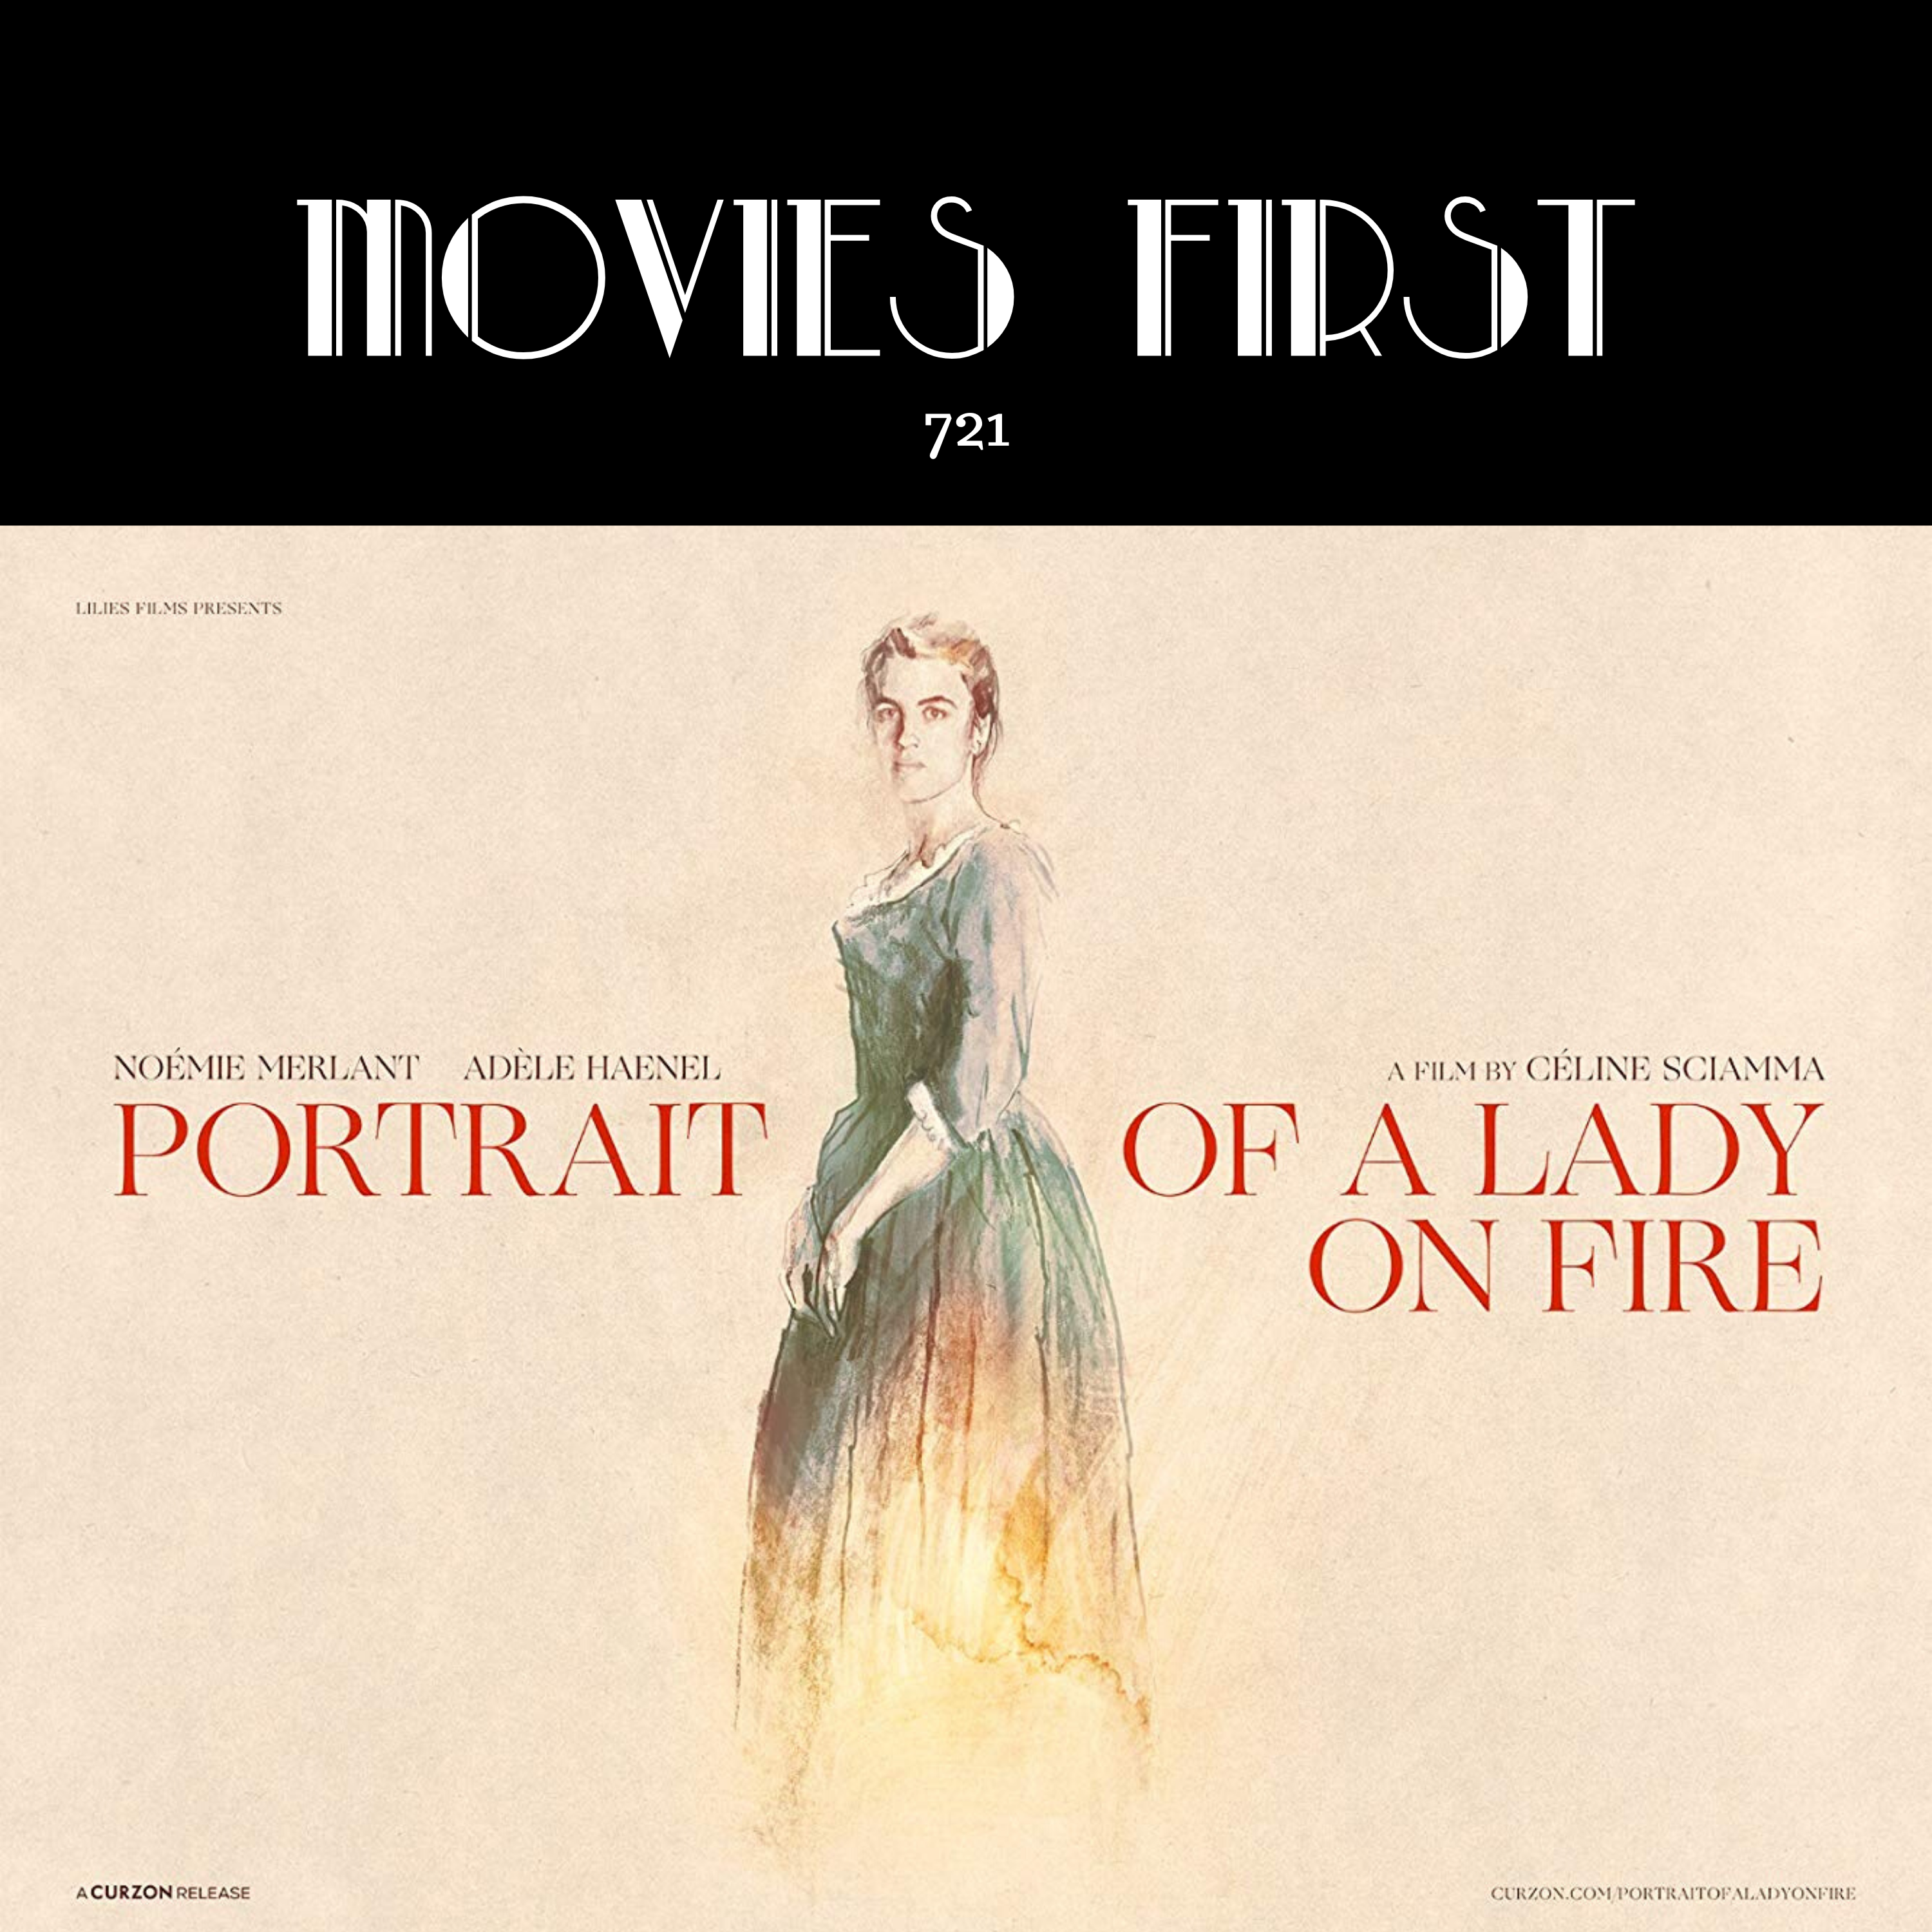 7: Portrait Of A Lady On Fire (Drama, Romance) (the MoviesFirst review)